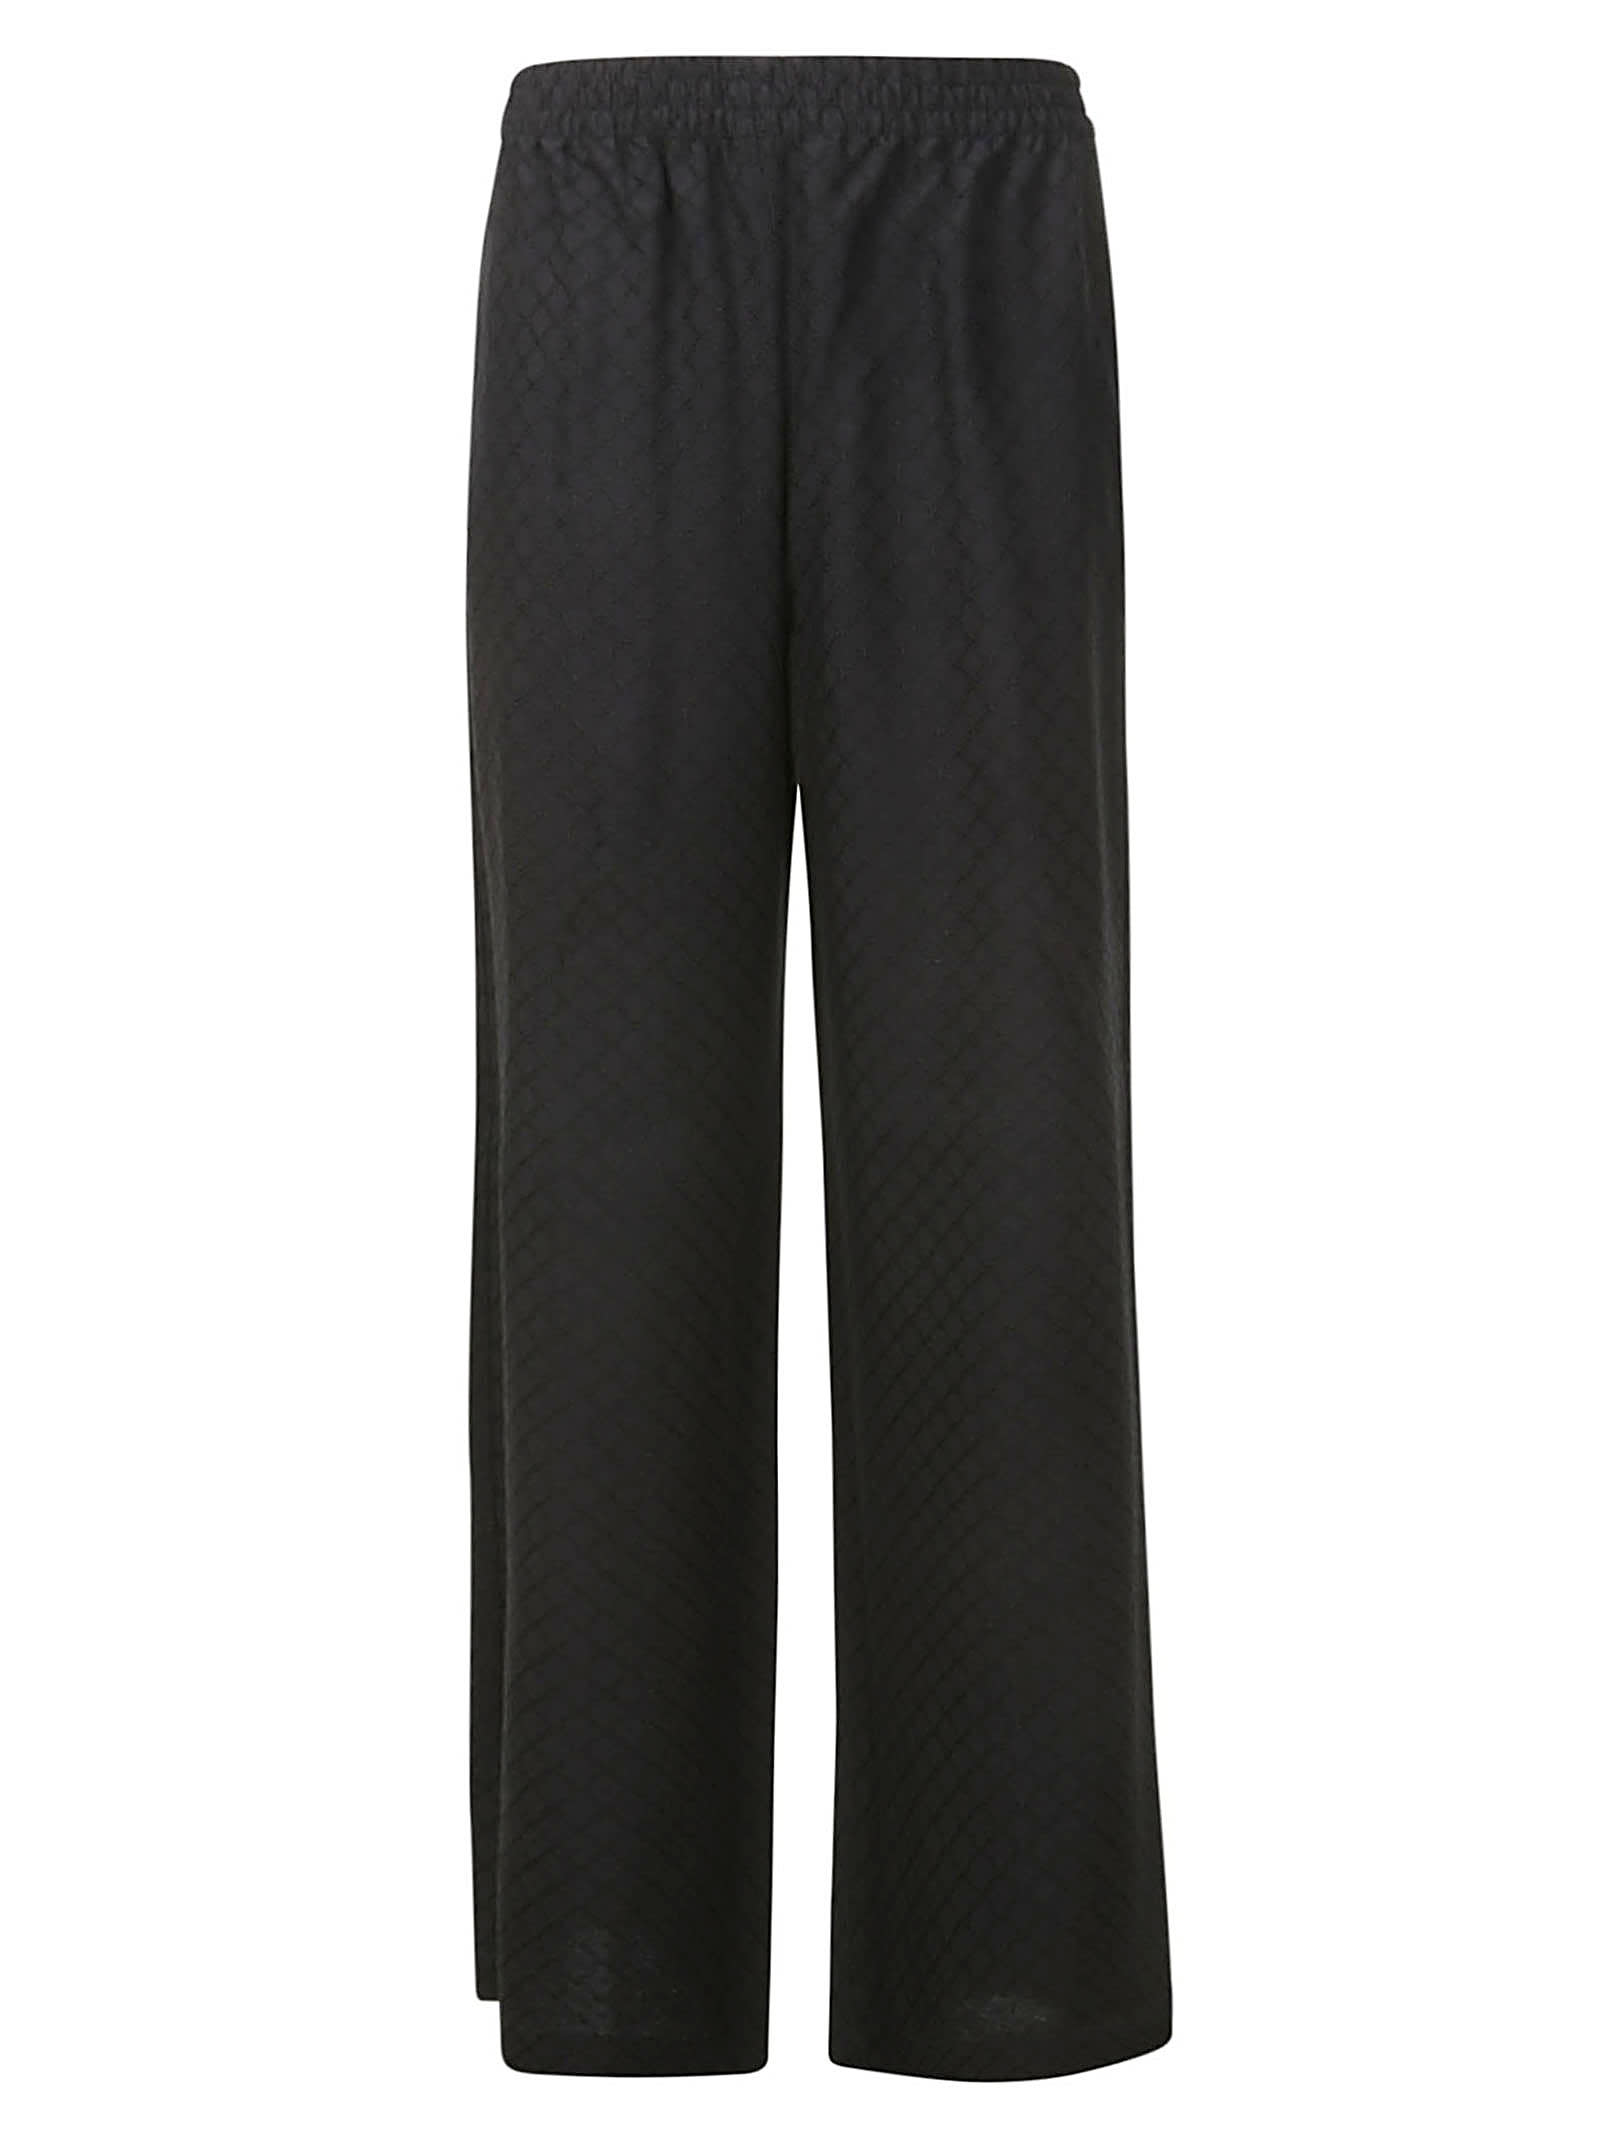 GOLDEN GOOSE JOURNEY WS JOGGING PANTS BRITTANY VISCOSE FABRIC